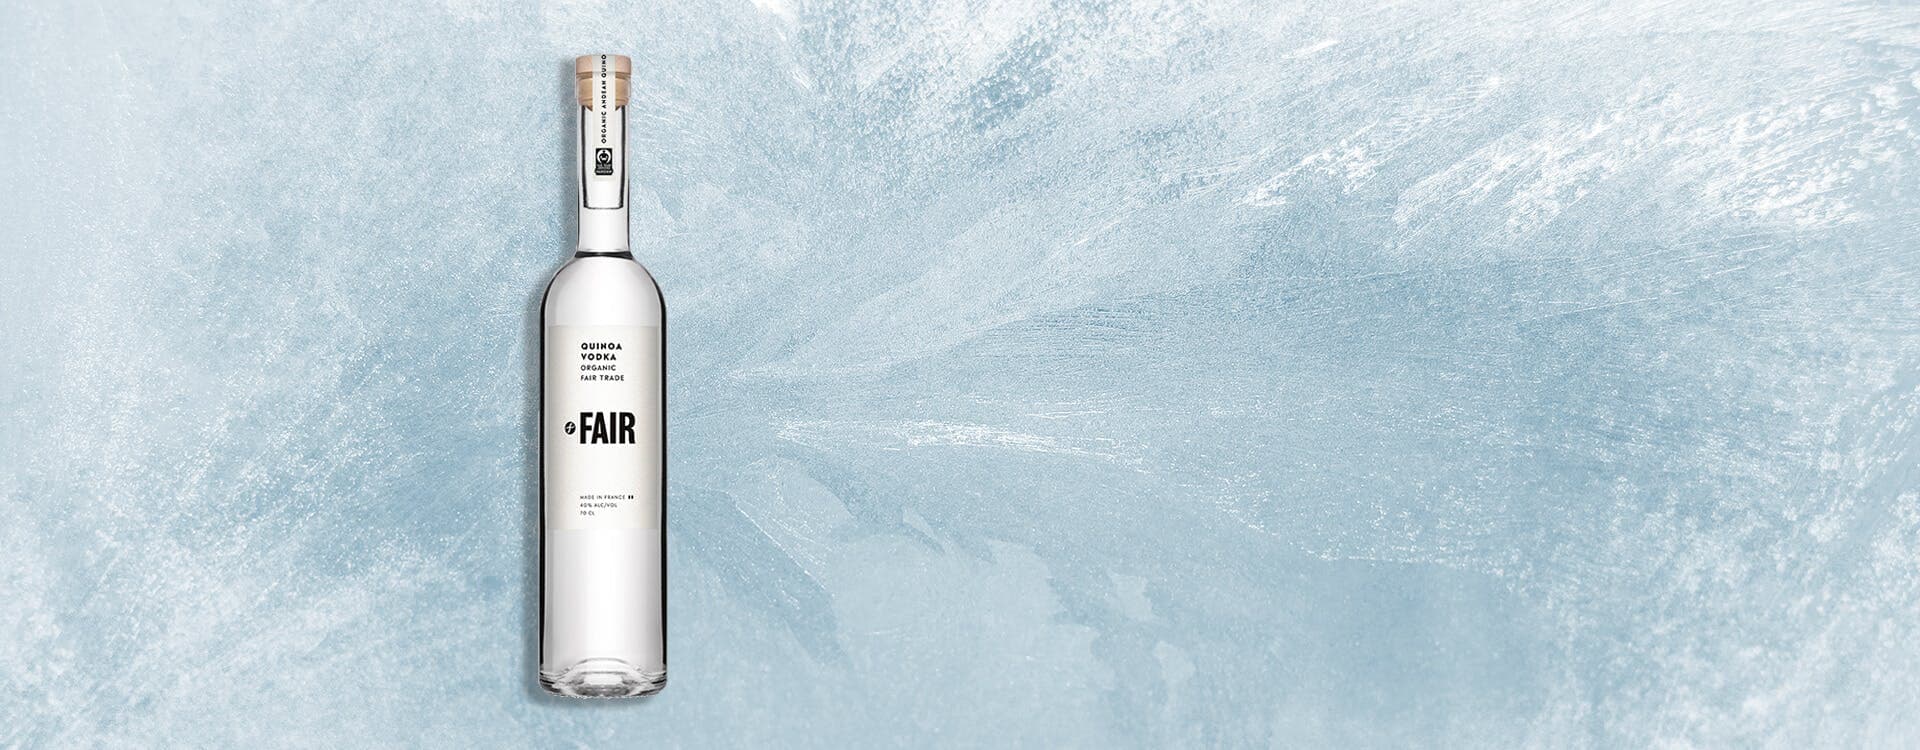 VODKA DAY - RECEIVE A 5CL SAMPLE WITH EVERY VODKA PURCHASE